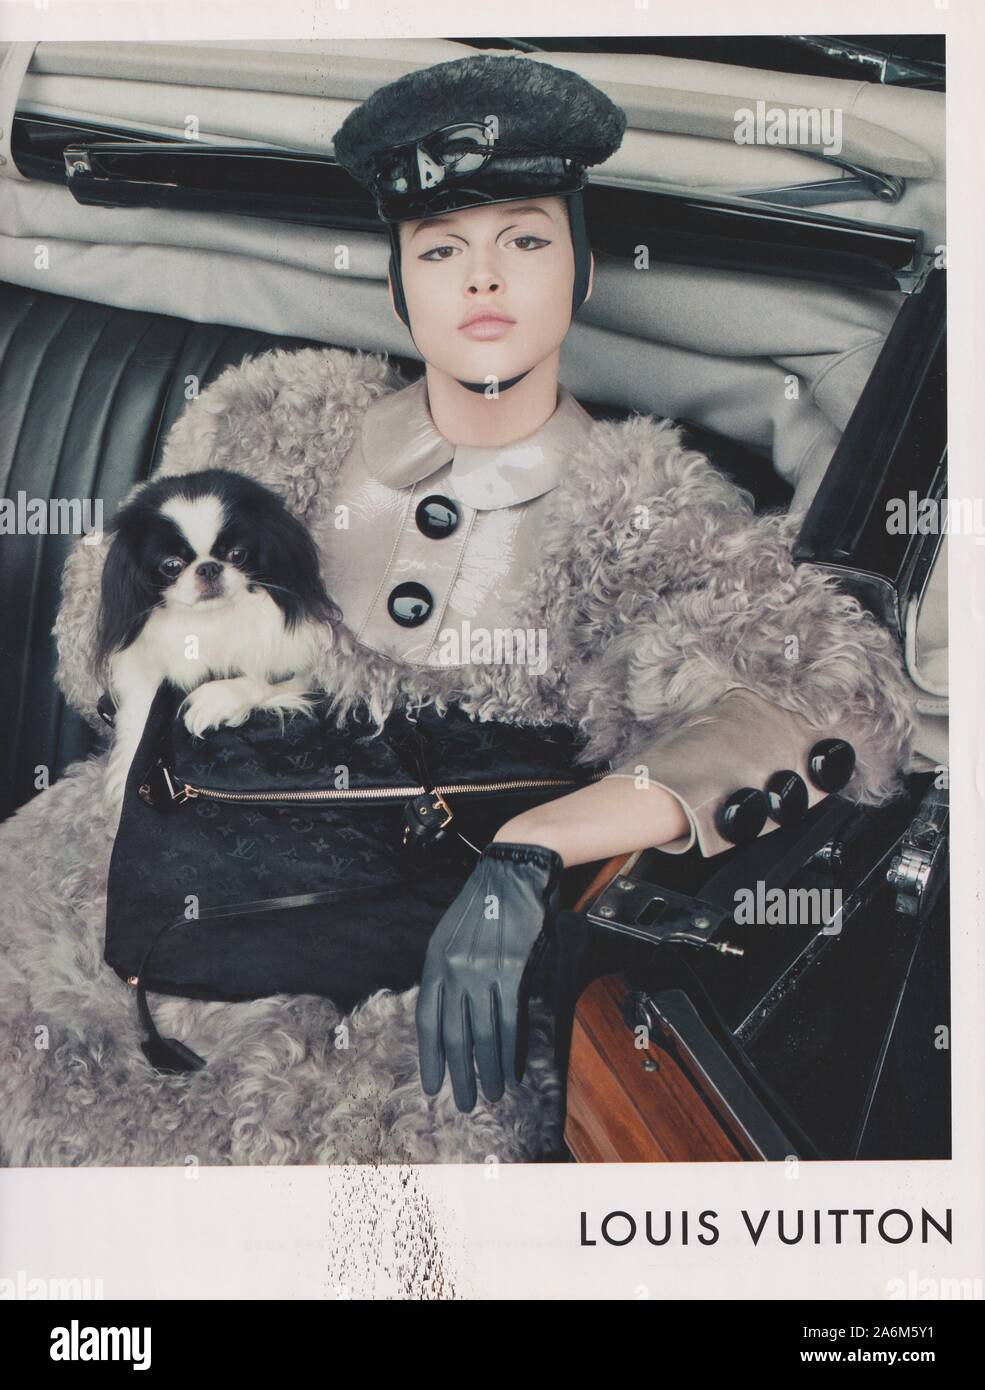 poster advertising Louis Vuitton handbag with Maartje Verhoef in paper  magazine from 2015 year, advertisement, creative LV Louis Vuitton 2010s  advert Stock Photo - Alamy